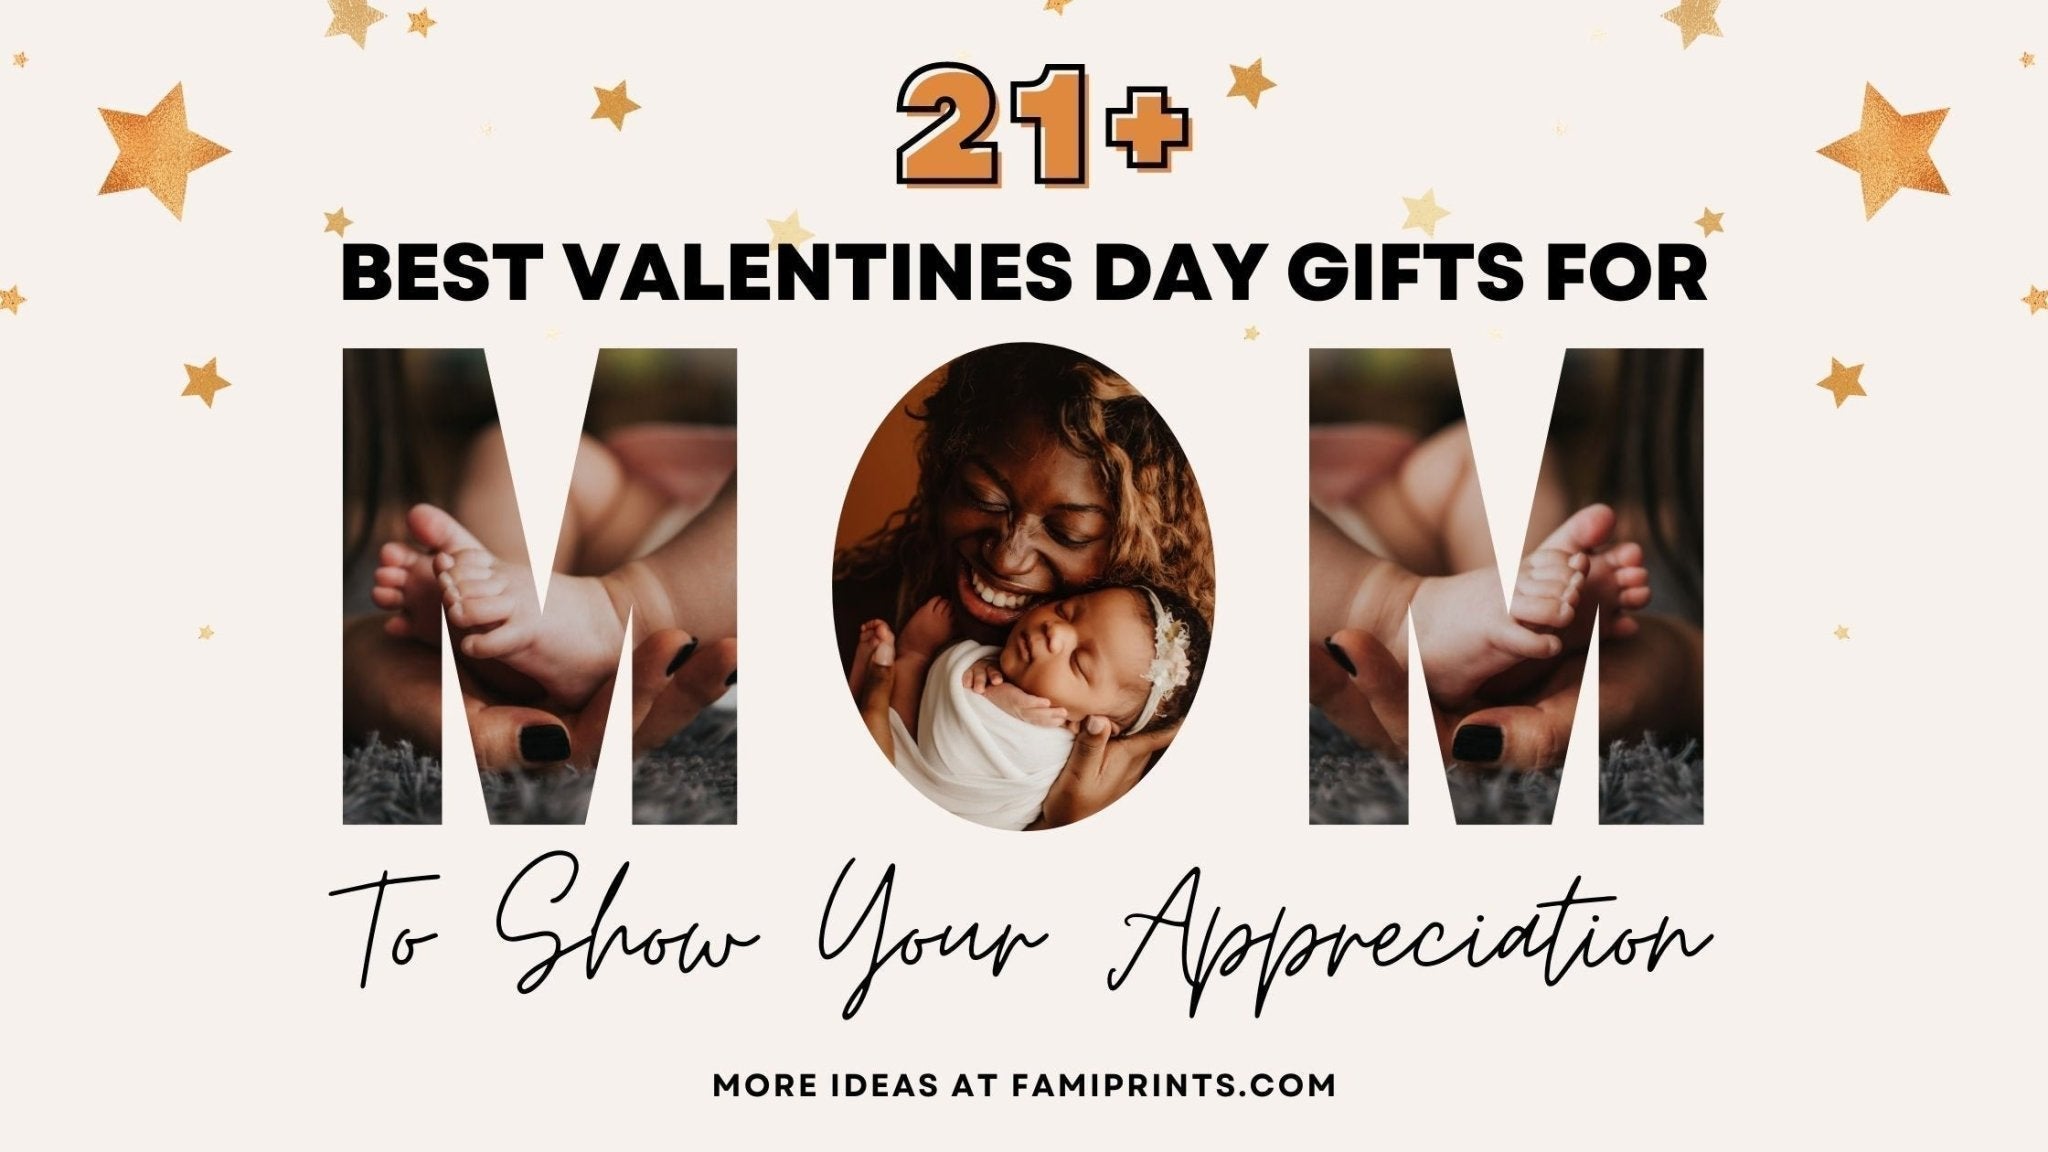 http://famiprints.com/cdn/shop/articles/21-best-valentines-day-gifts-for-mom-to-show-your-appreciation-893148.jpg?v=1658902805